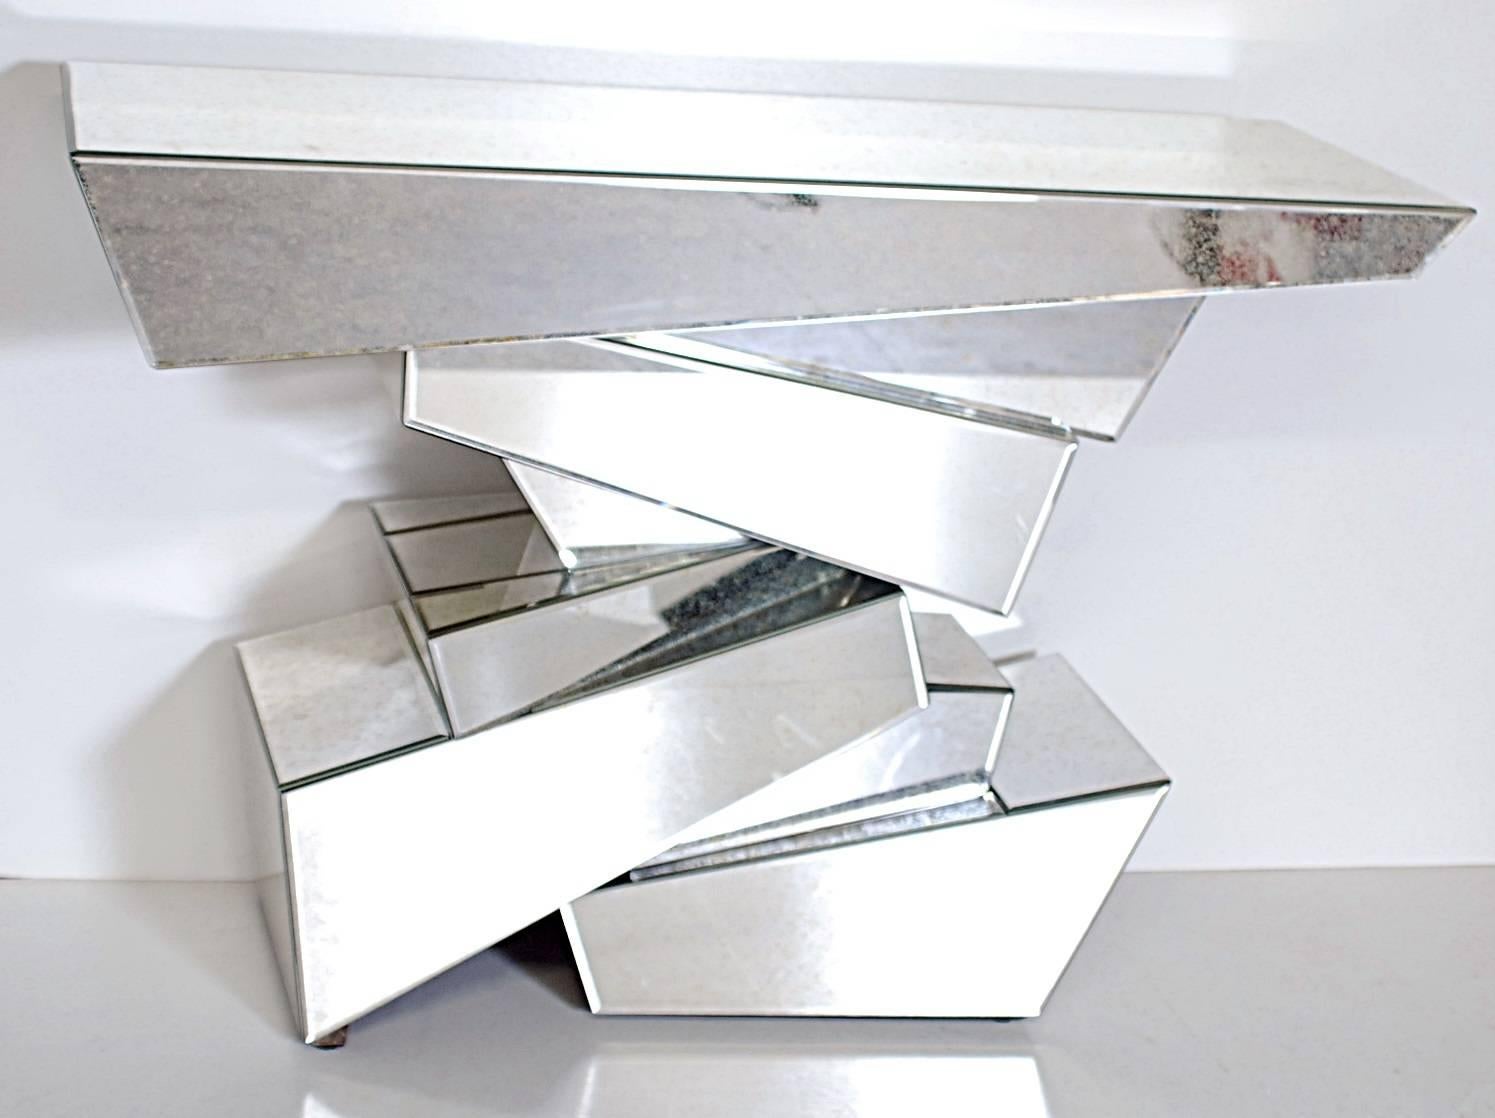 Outstanding pair of rock form console tables with an antique mirror finish.